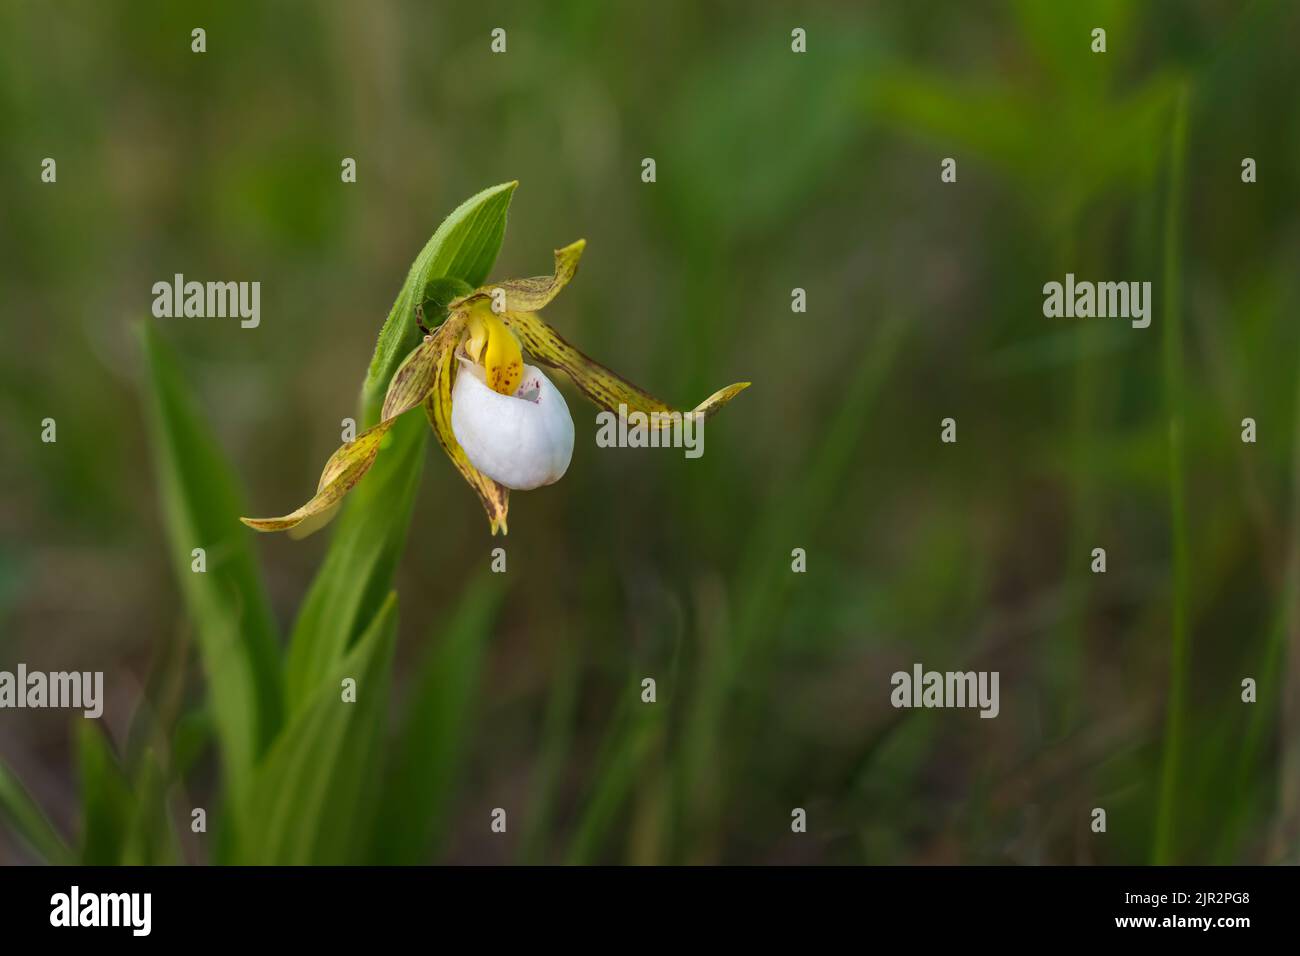 The small white endangered lady's slipper at the Tall Grass Prairie Preserve in southern Manitoba, Canada. Stock Photo